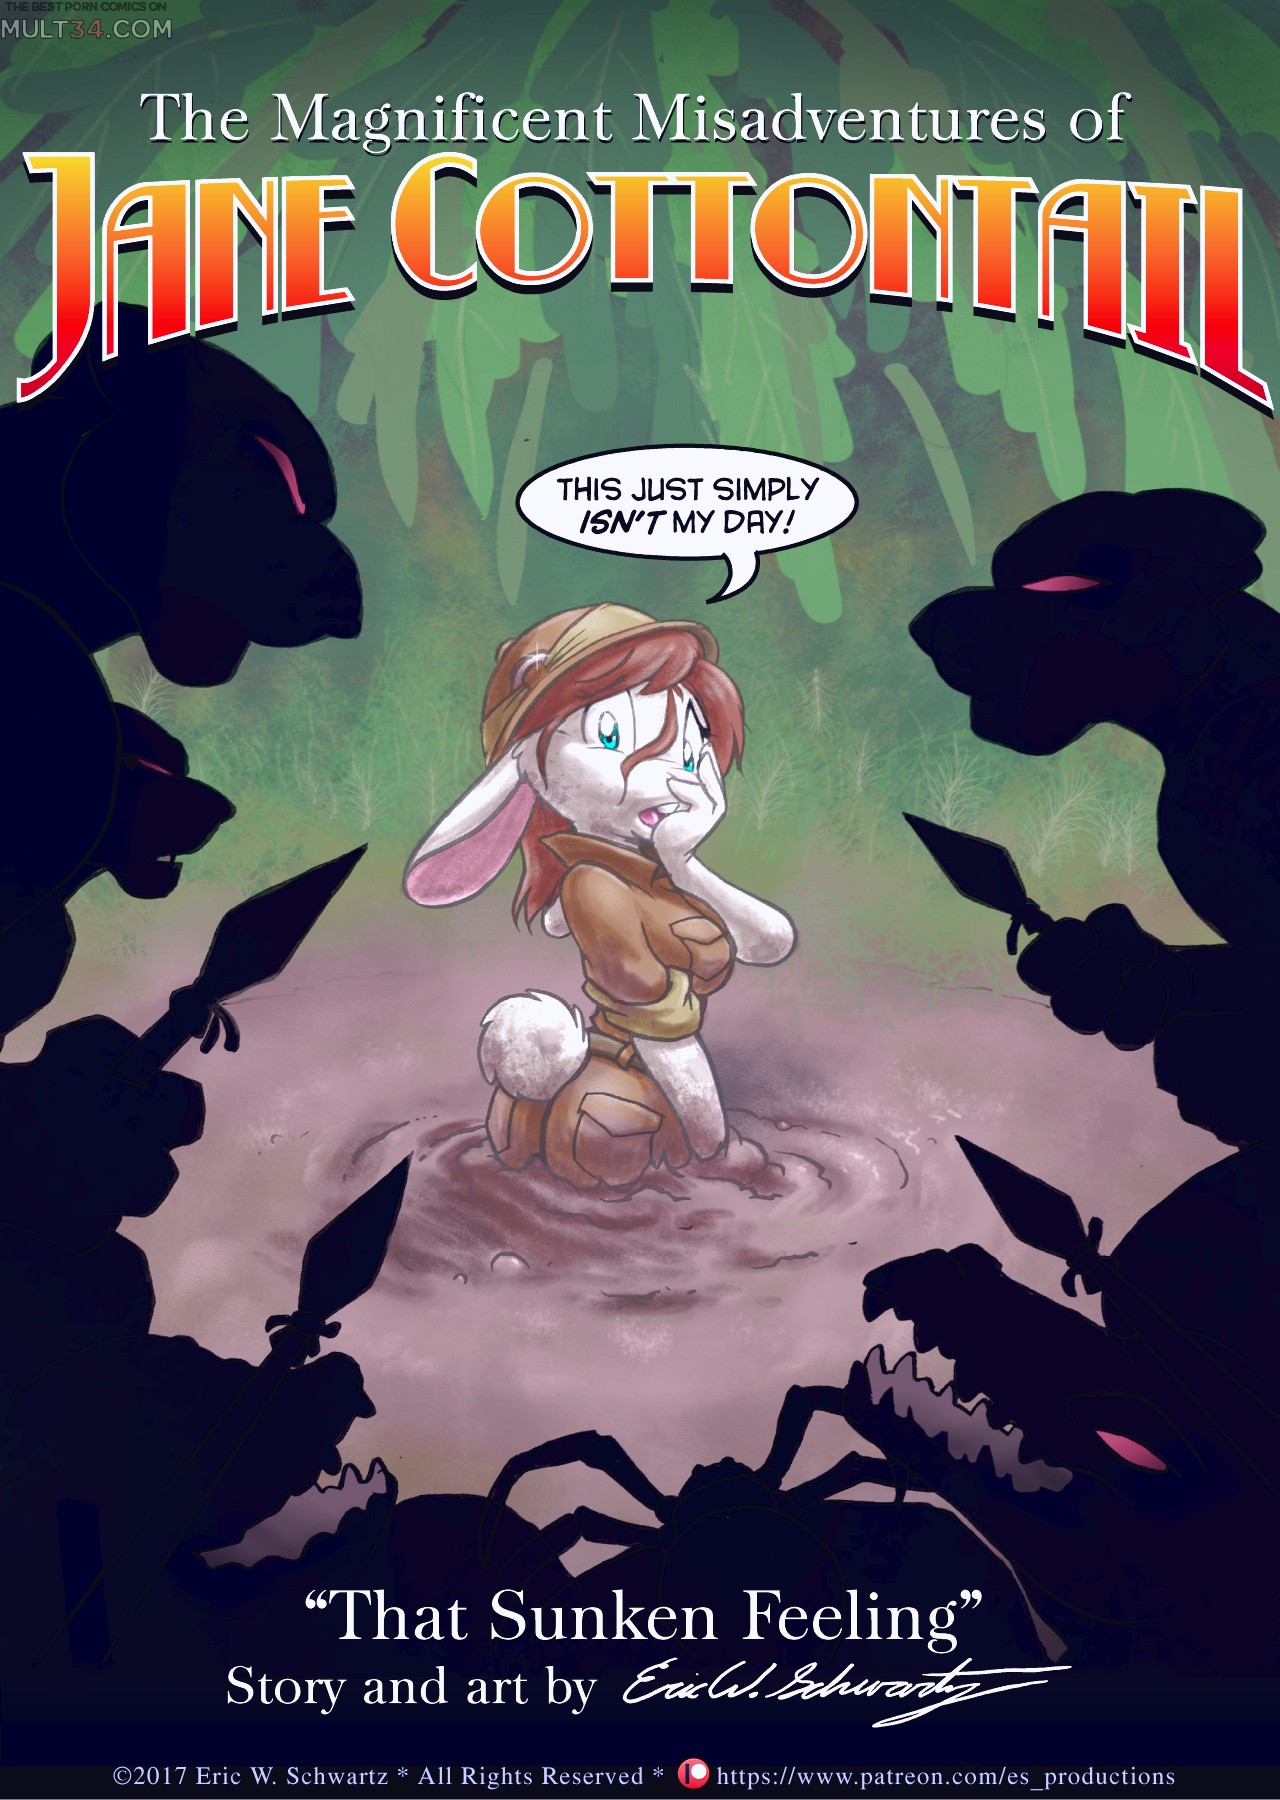 The Misadventures of Jane Cottontail porn comic page 1 on category Tarzan